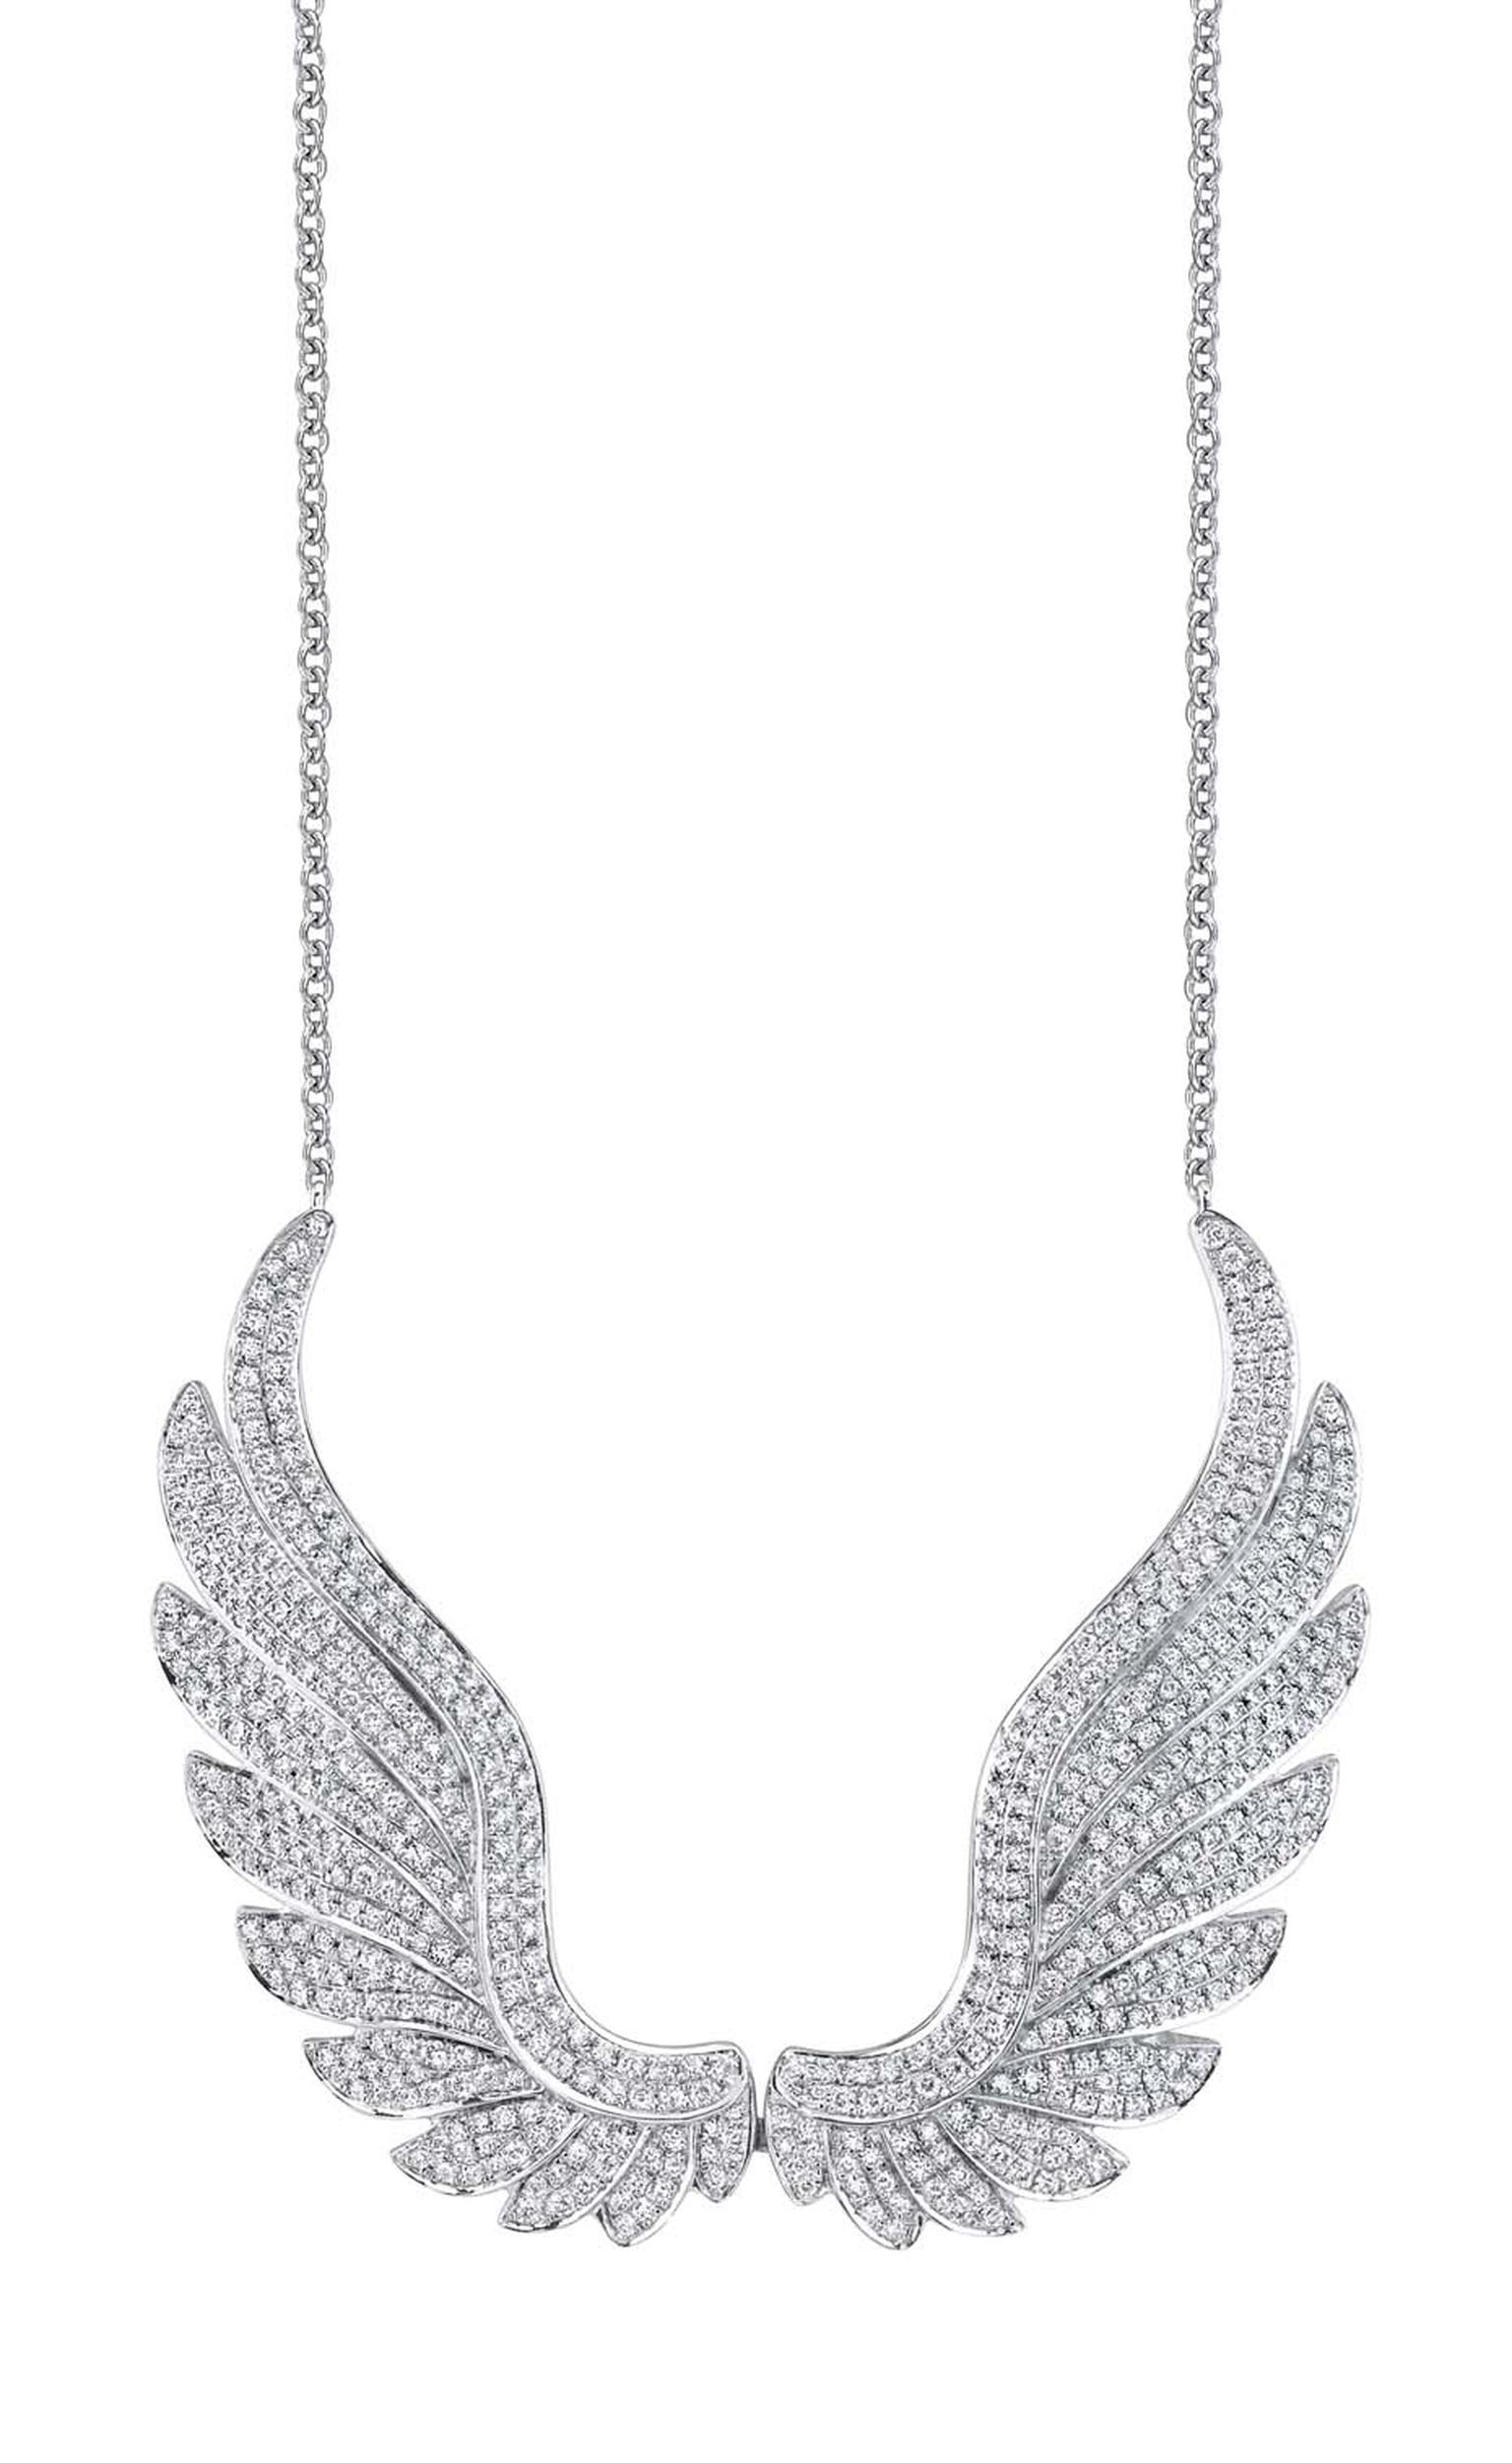 Anita Ko Wing necklace in white gold with diamonds.